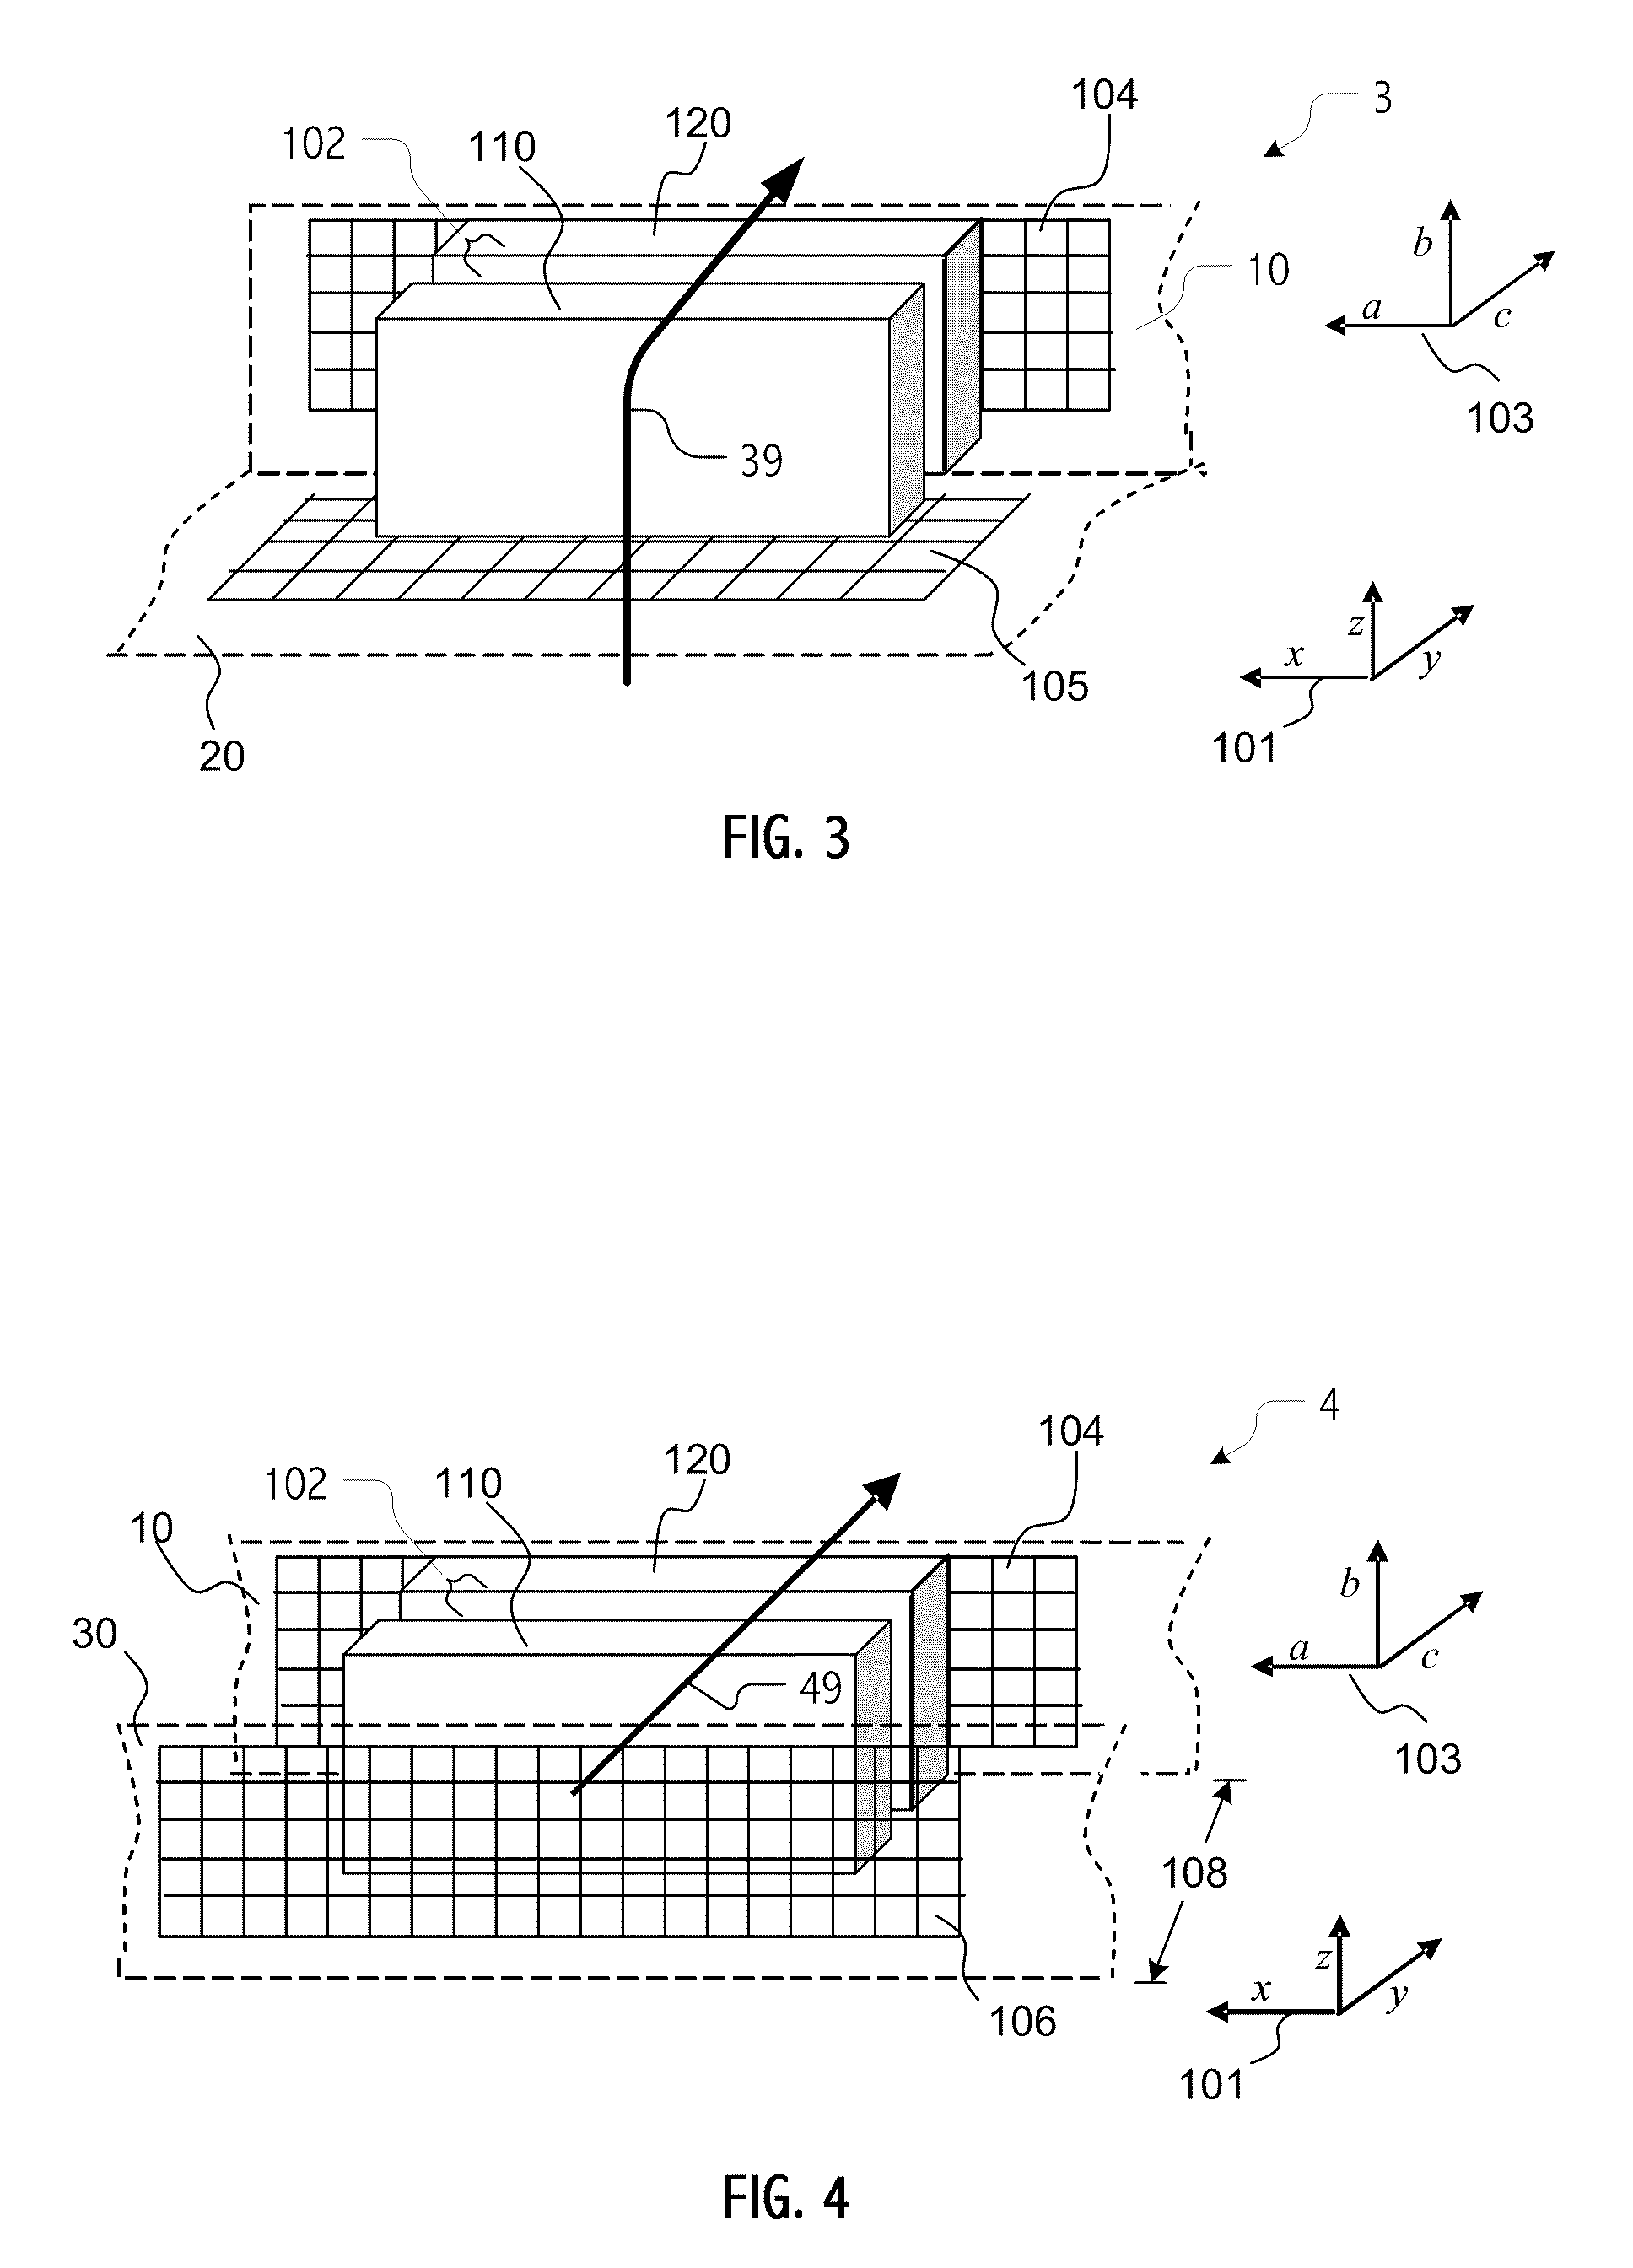 Spatially distributed ventilation boundary using electrohydrodynamic fluid accelerators